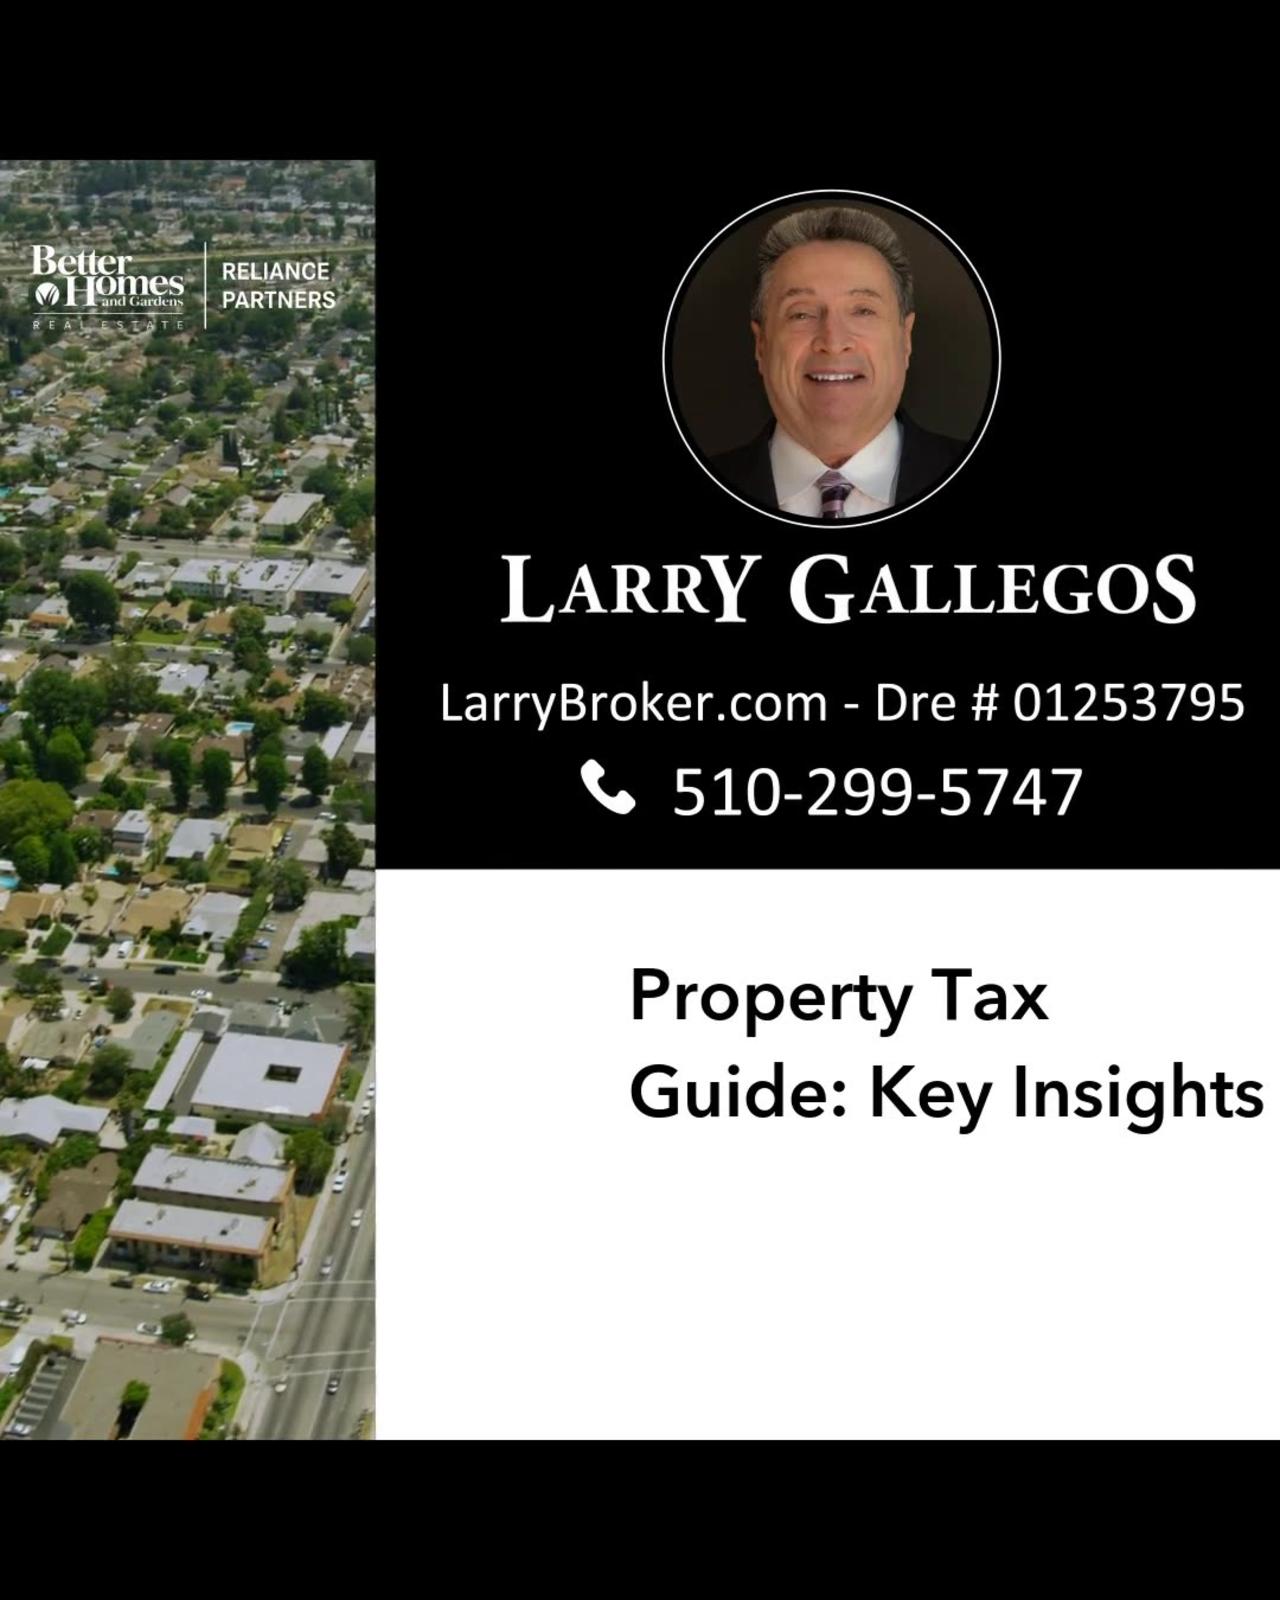 Property Tax Guide: Key Insights